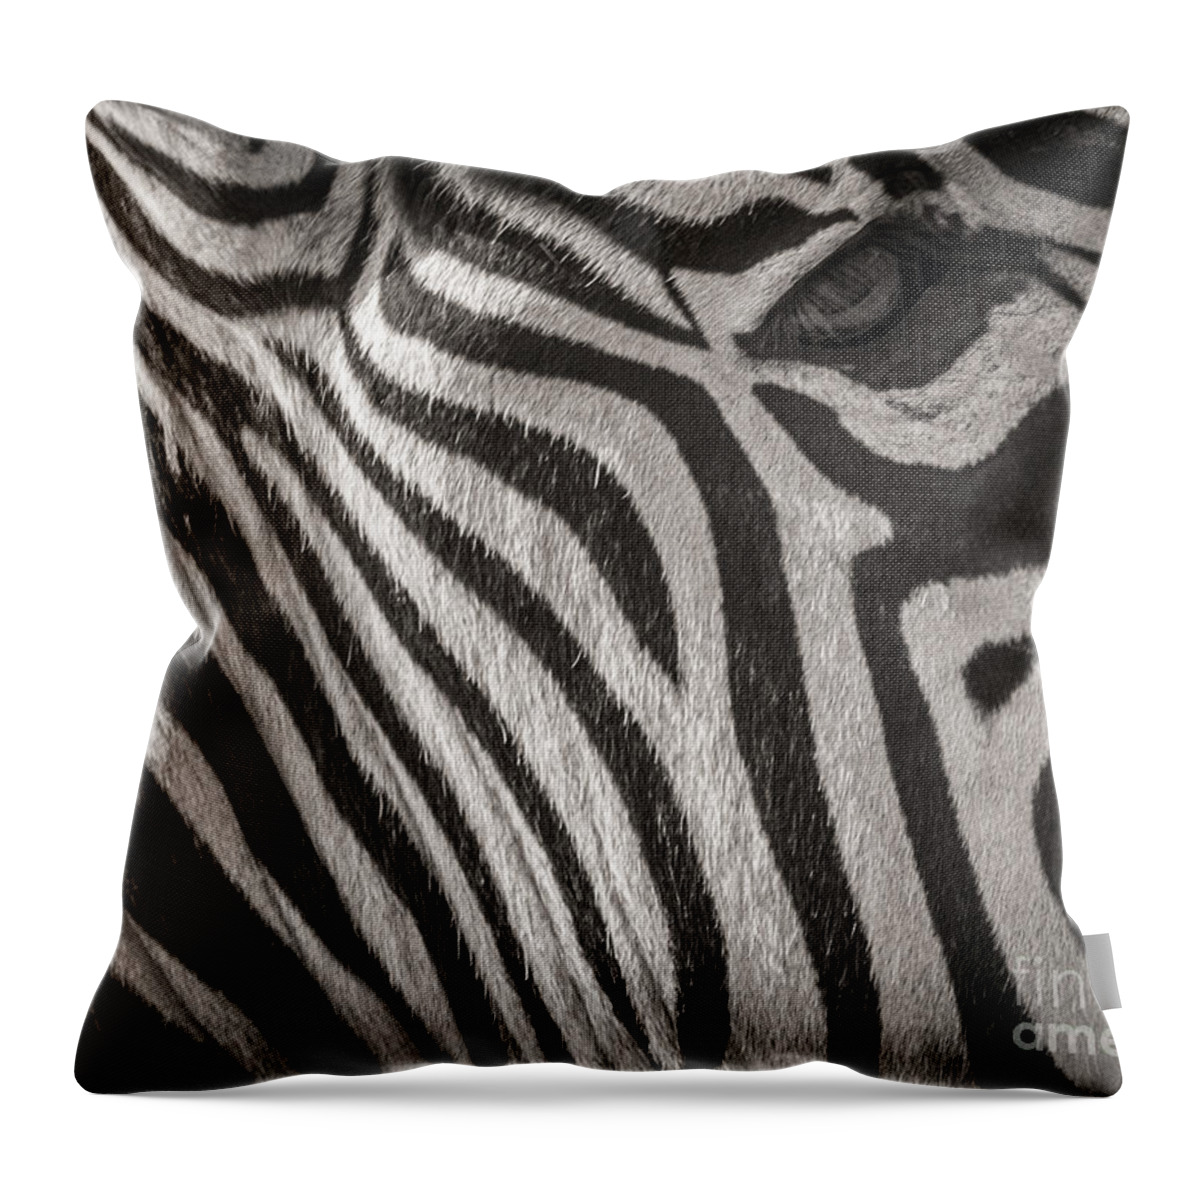 Zebra Throw Pillow featuring the photograph Anticipation by Sherry Davis